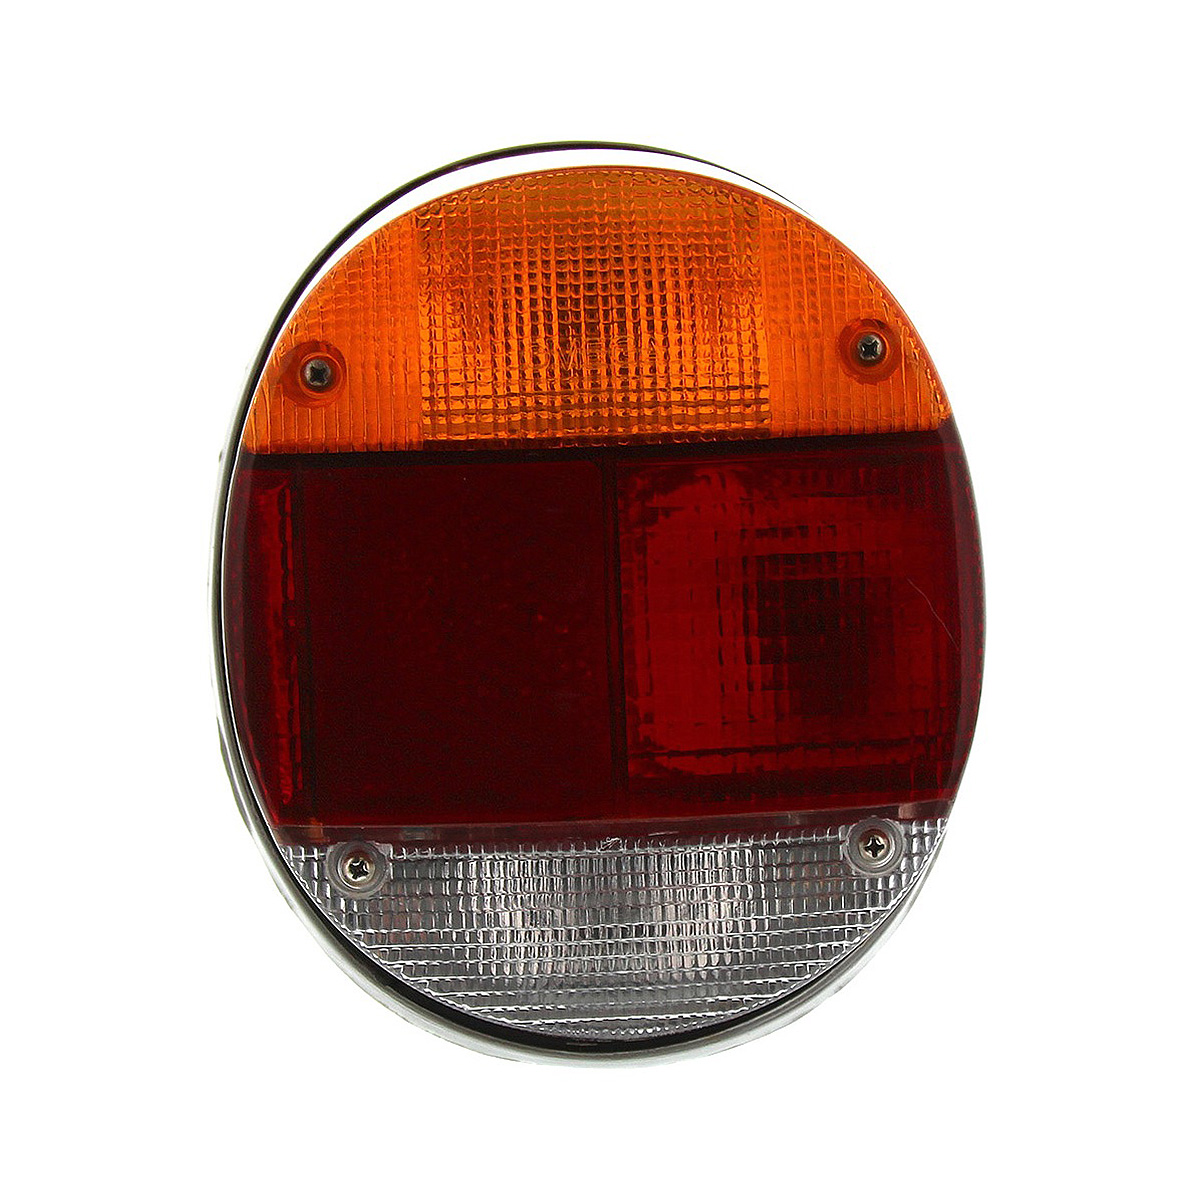 VW Tail Light Assembly - Red/Amber Lens - Left - 1973-79 Beetle - 1974-74 Thing